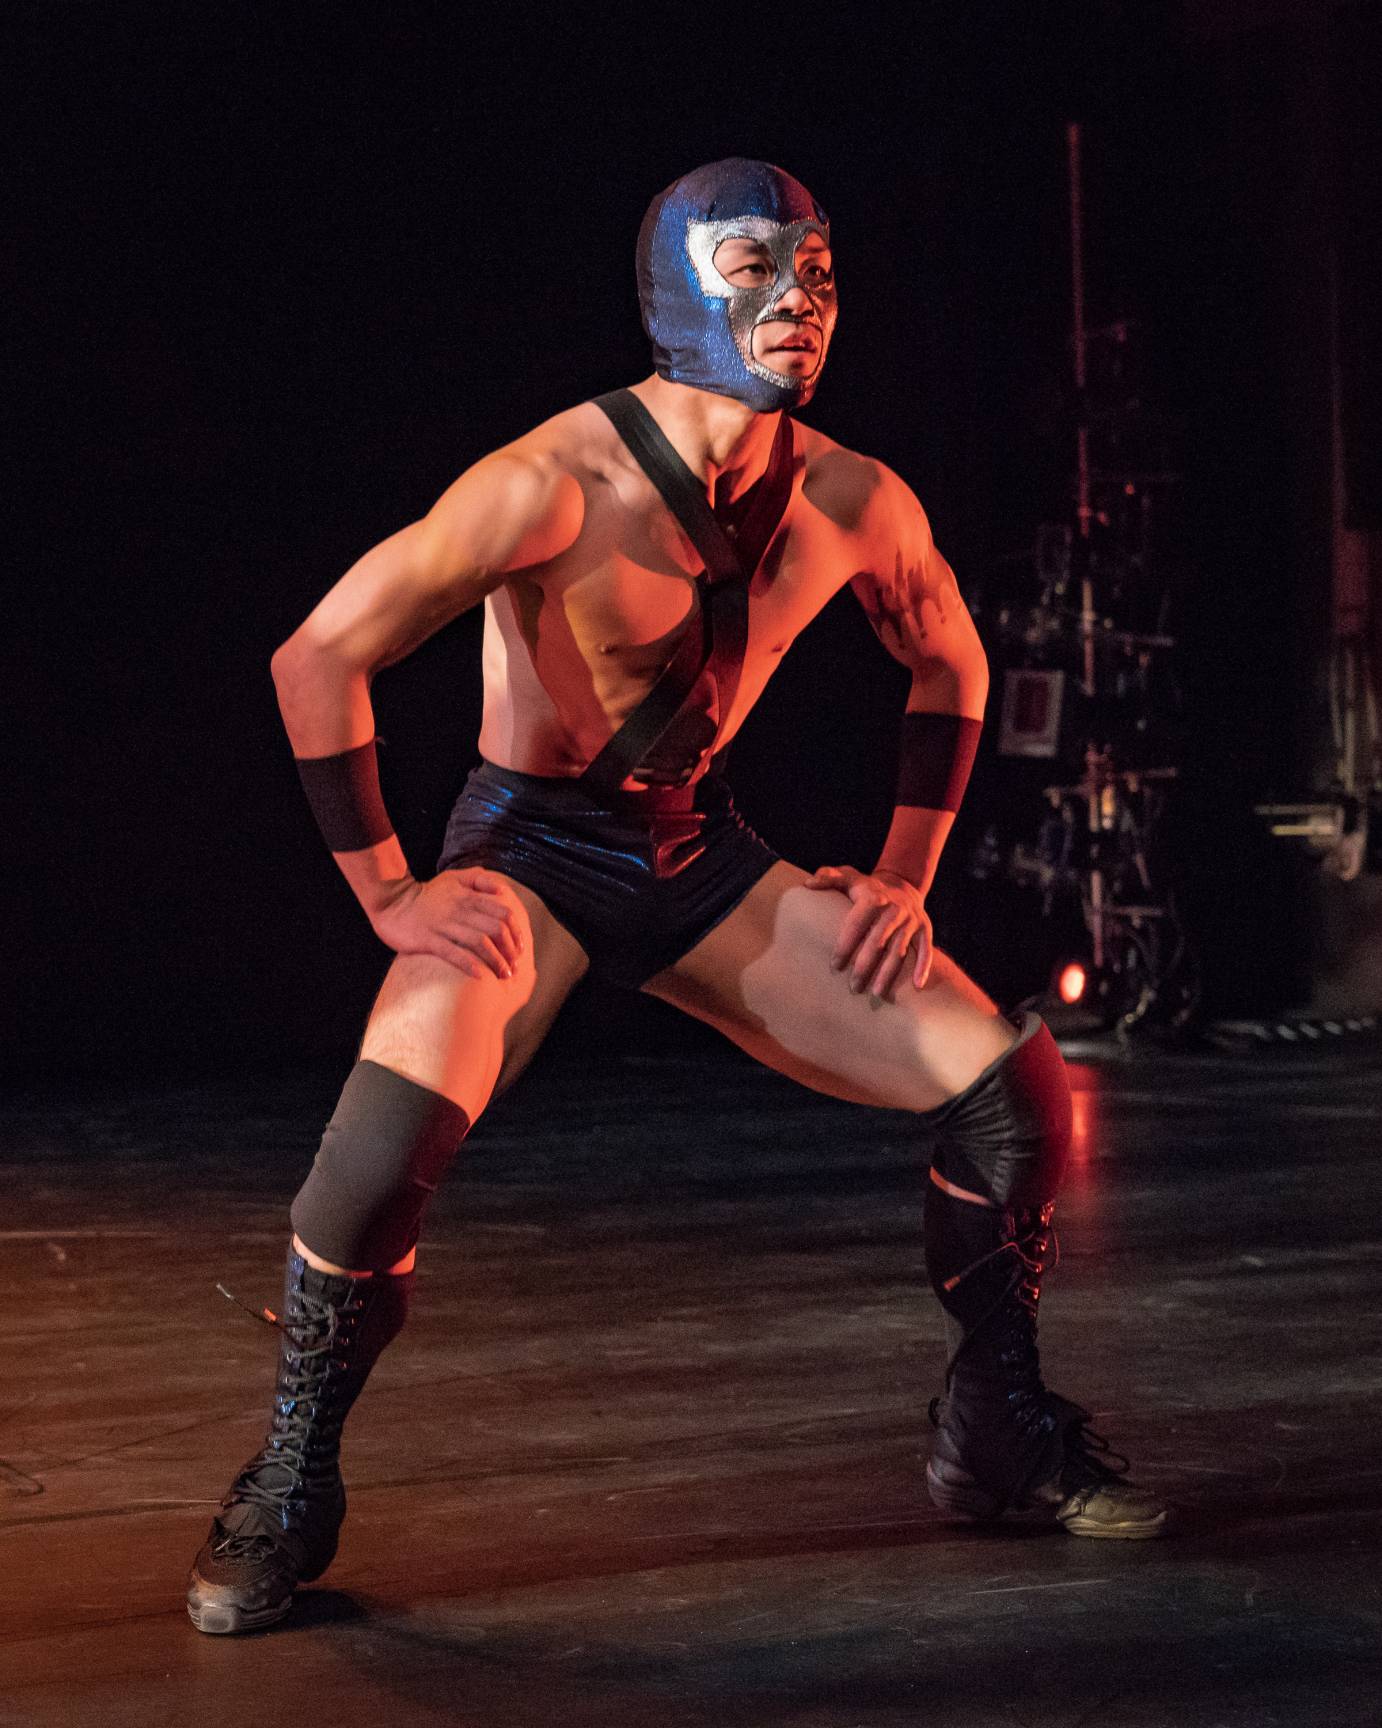 A man in a wrestling mask assumes a squat position looking out to the audience